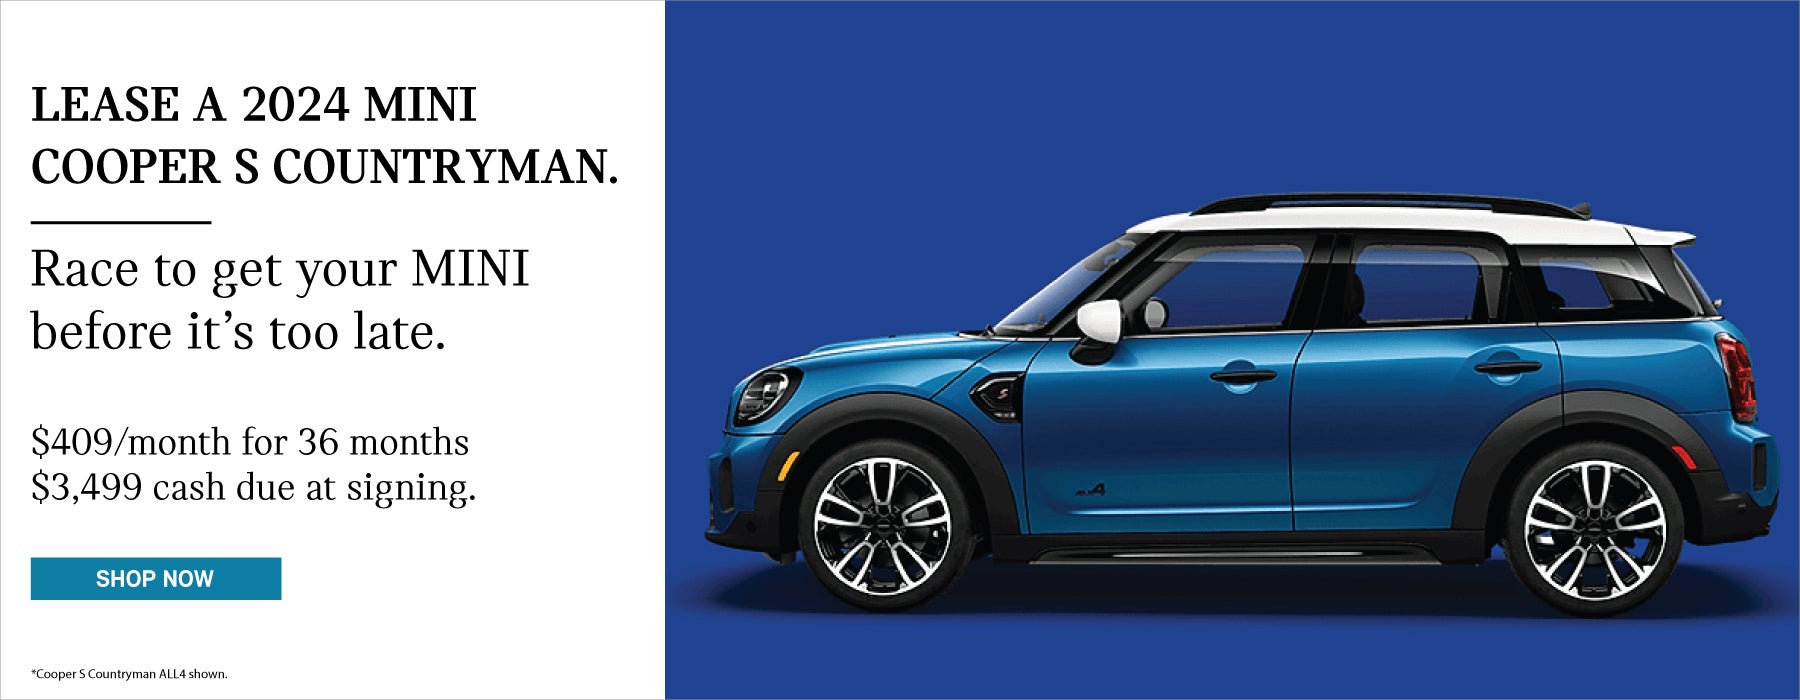 Full left view of MINI Countryman on blue background